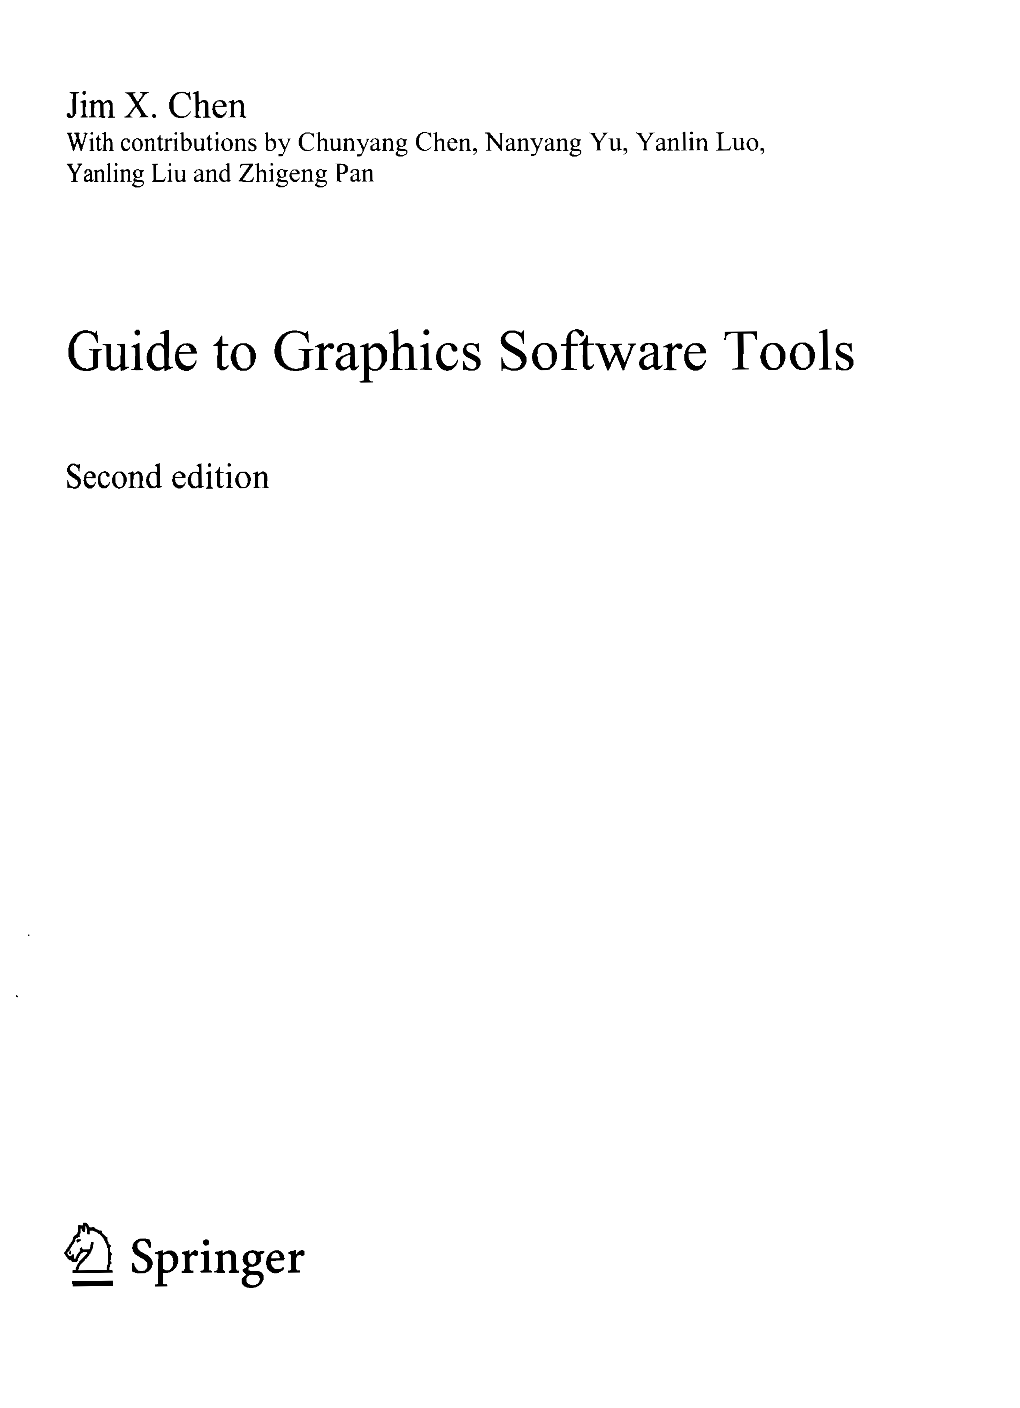 Guide to Graphics Software Tools